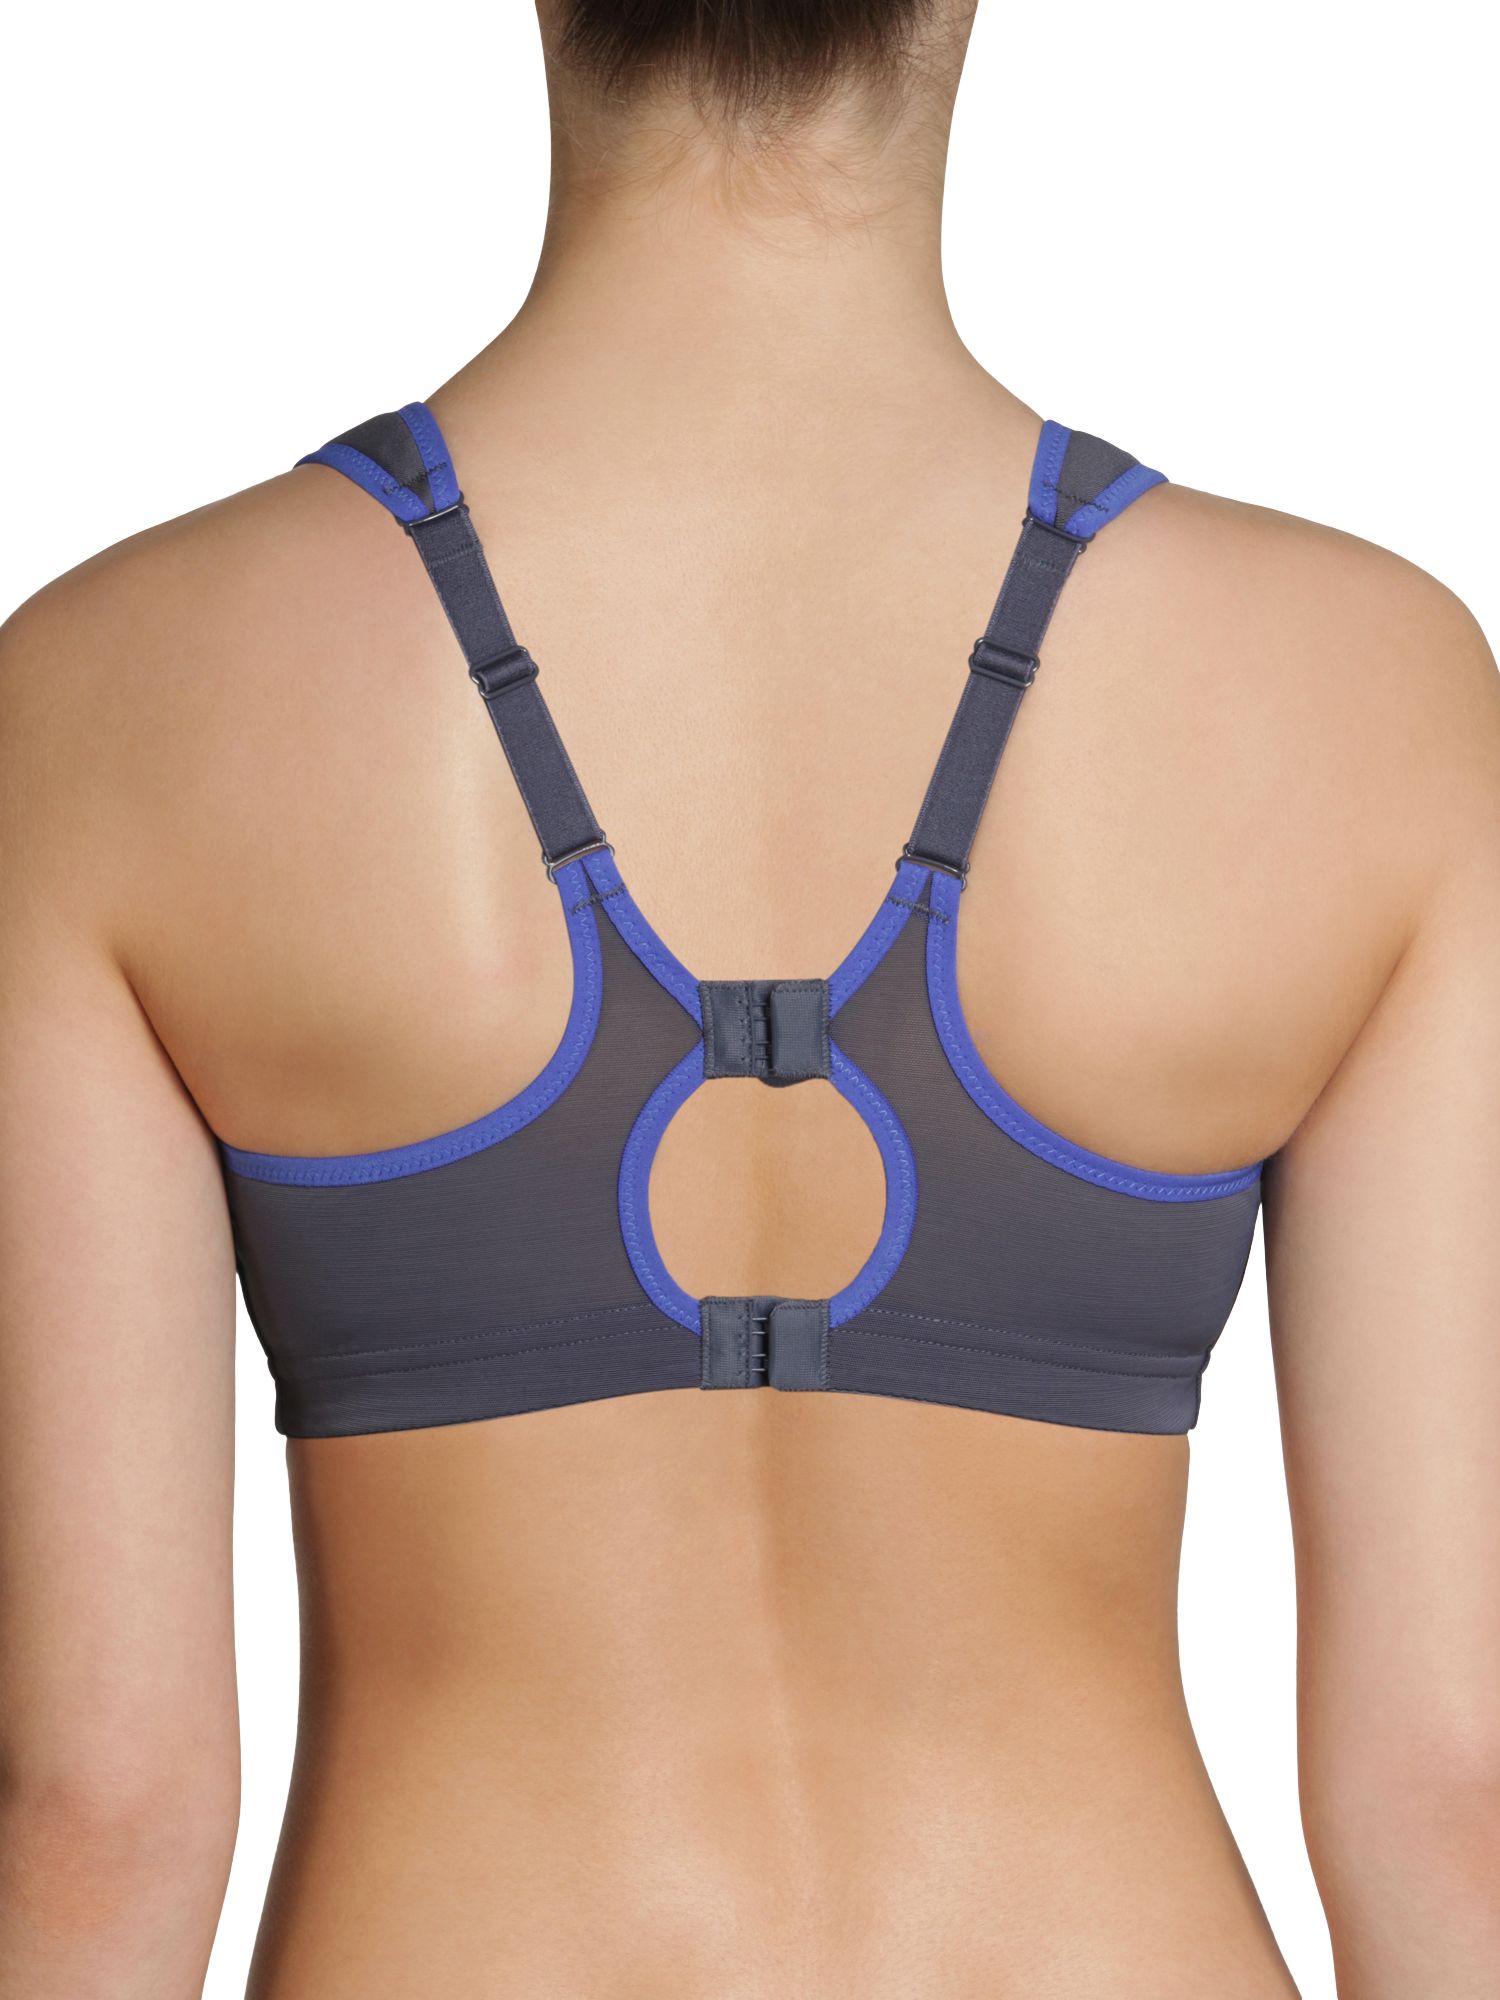  Shock Absorber Women's Active Multi Sports Support